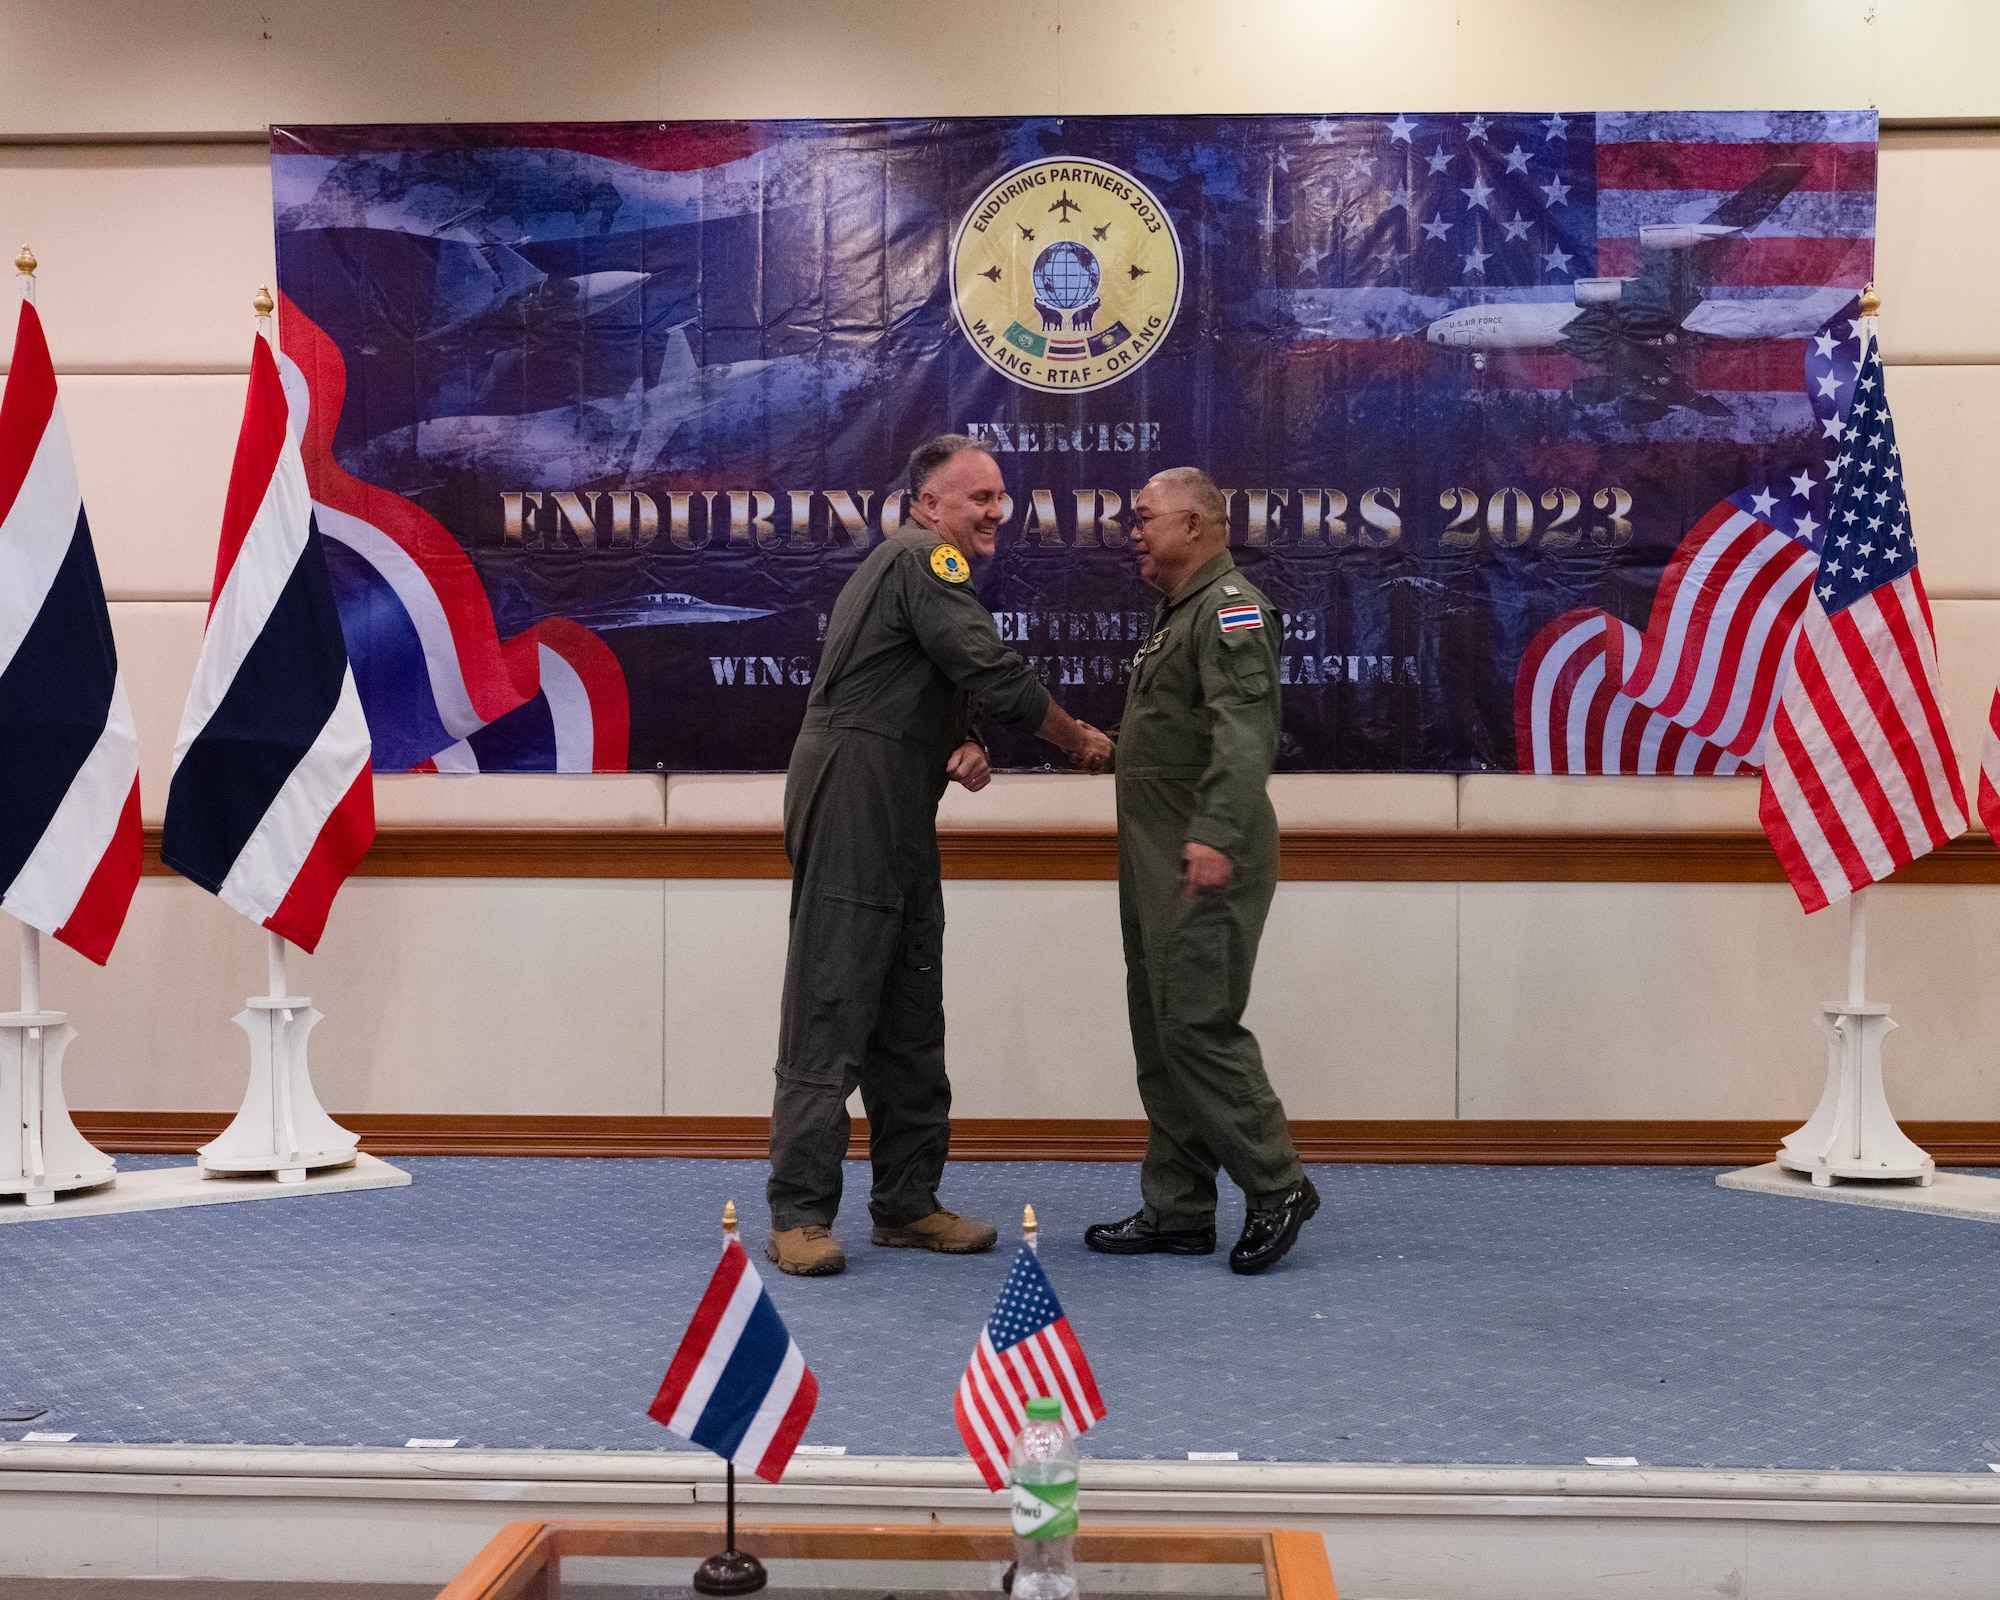 U.S. Air Force Brig. Gen. Gent Welsh, Washington Air National Guard commander, and Royal Thai Air Force Group Captain Nat Kamintra, exercise director, shake hands after formally opening Enduring Partners 2023 at Korat Air Base, Kingdom of Thailand, Sept. 11, 2023. The Kingdom of Thailand and the Washington and Oregon Air National Guard will practice aerial refueling and fighter tactics during the exercise.